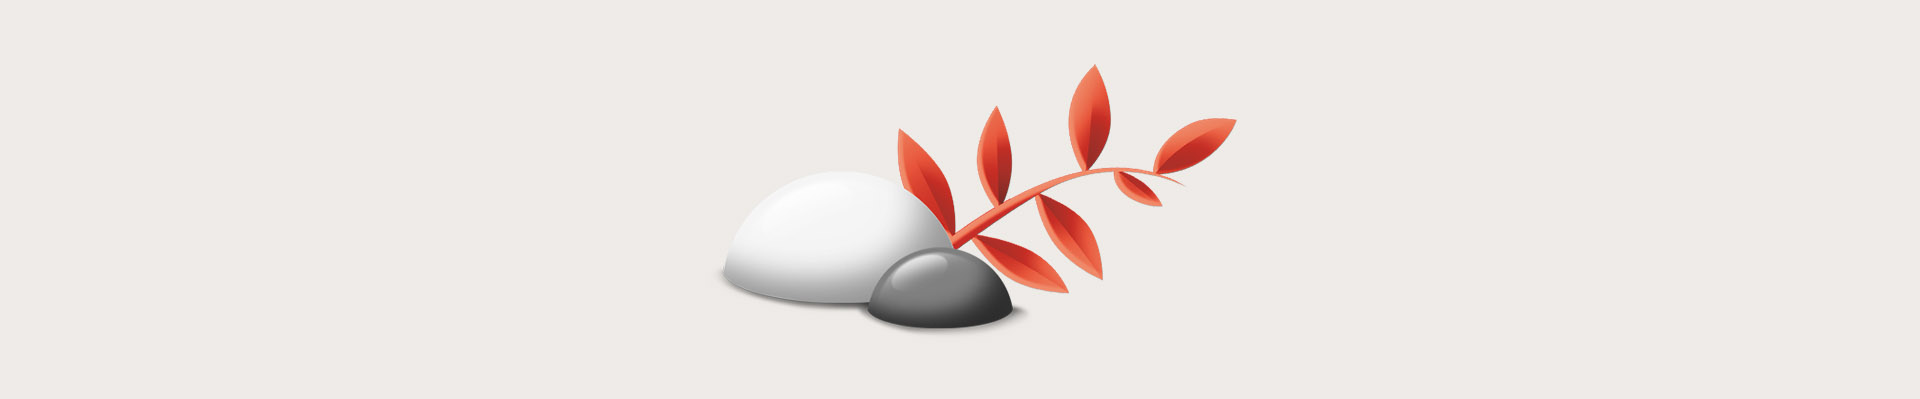 Two stones and branch – Illustration (illustration)